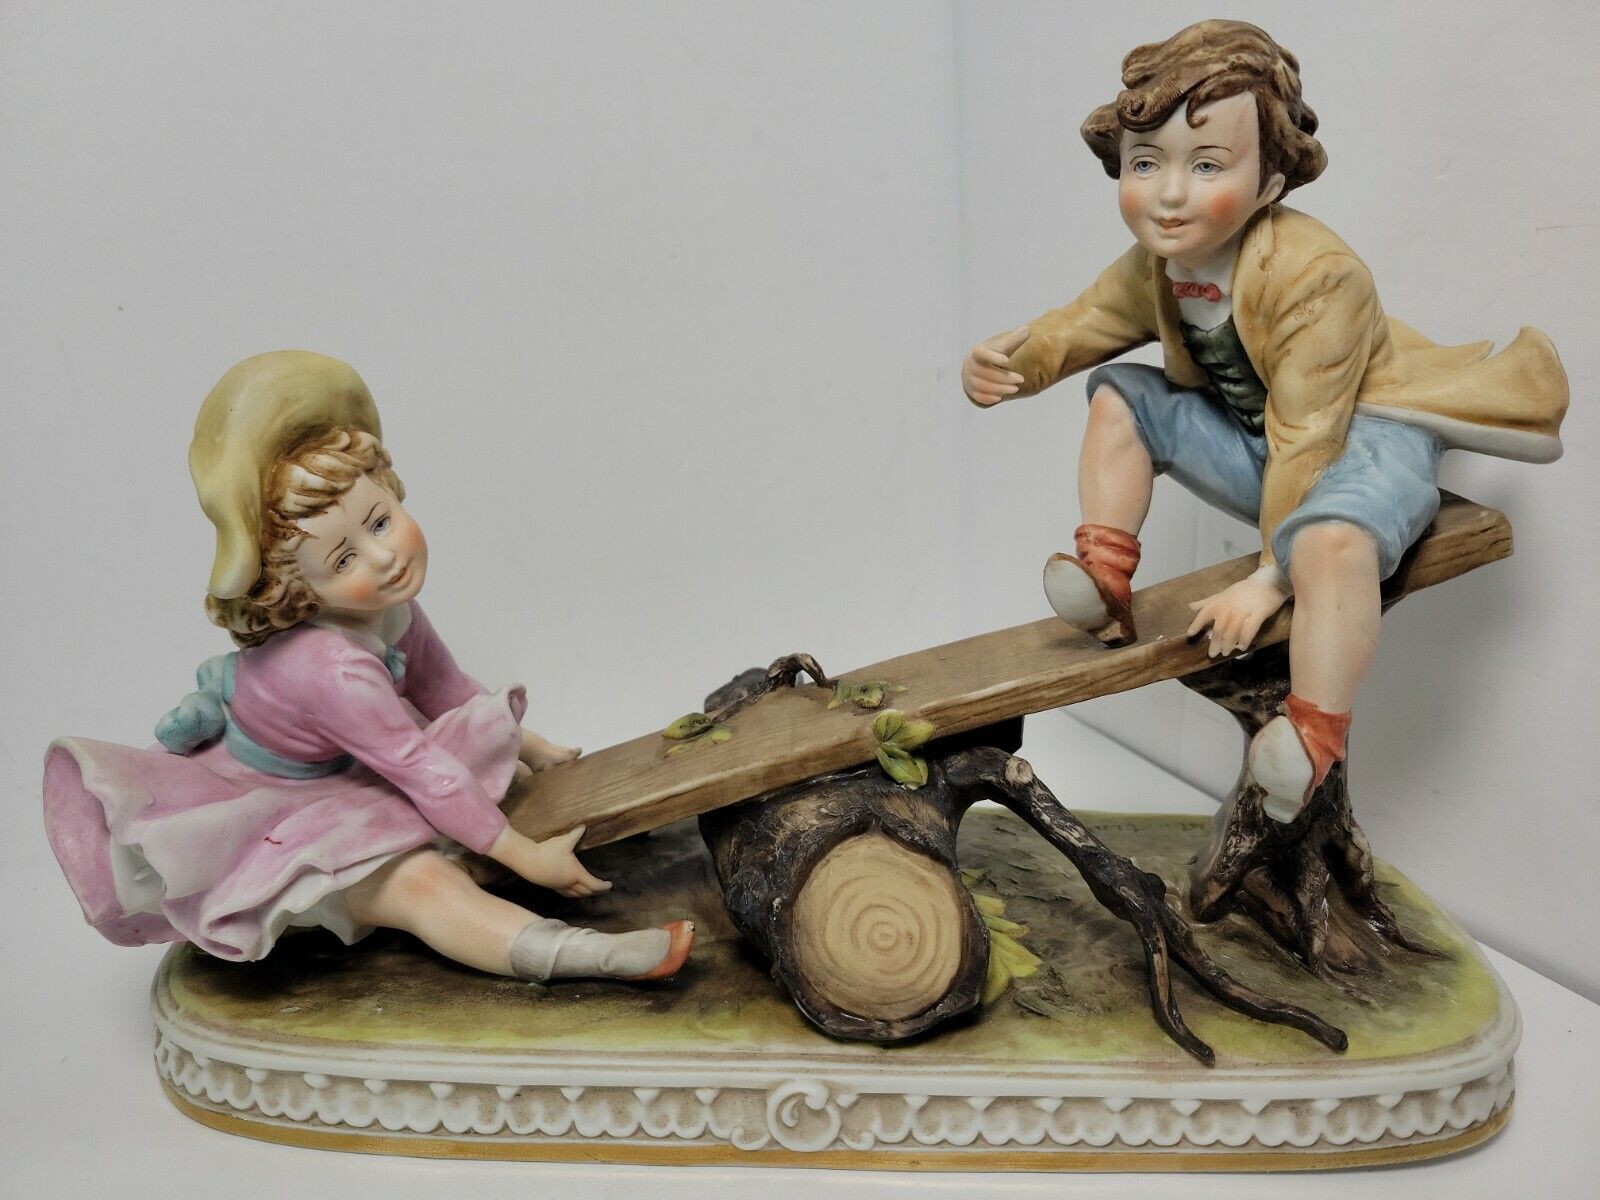 Vintage Capodimonte signed by B. Martino Boy & Girl on a Seesaw Figurine 